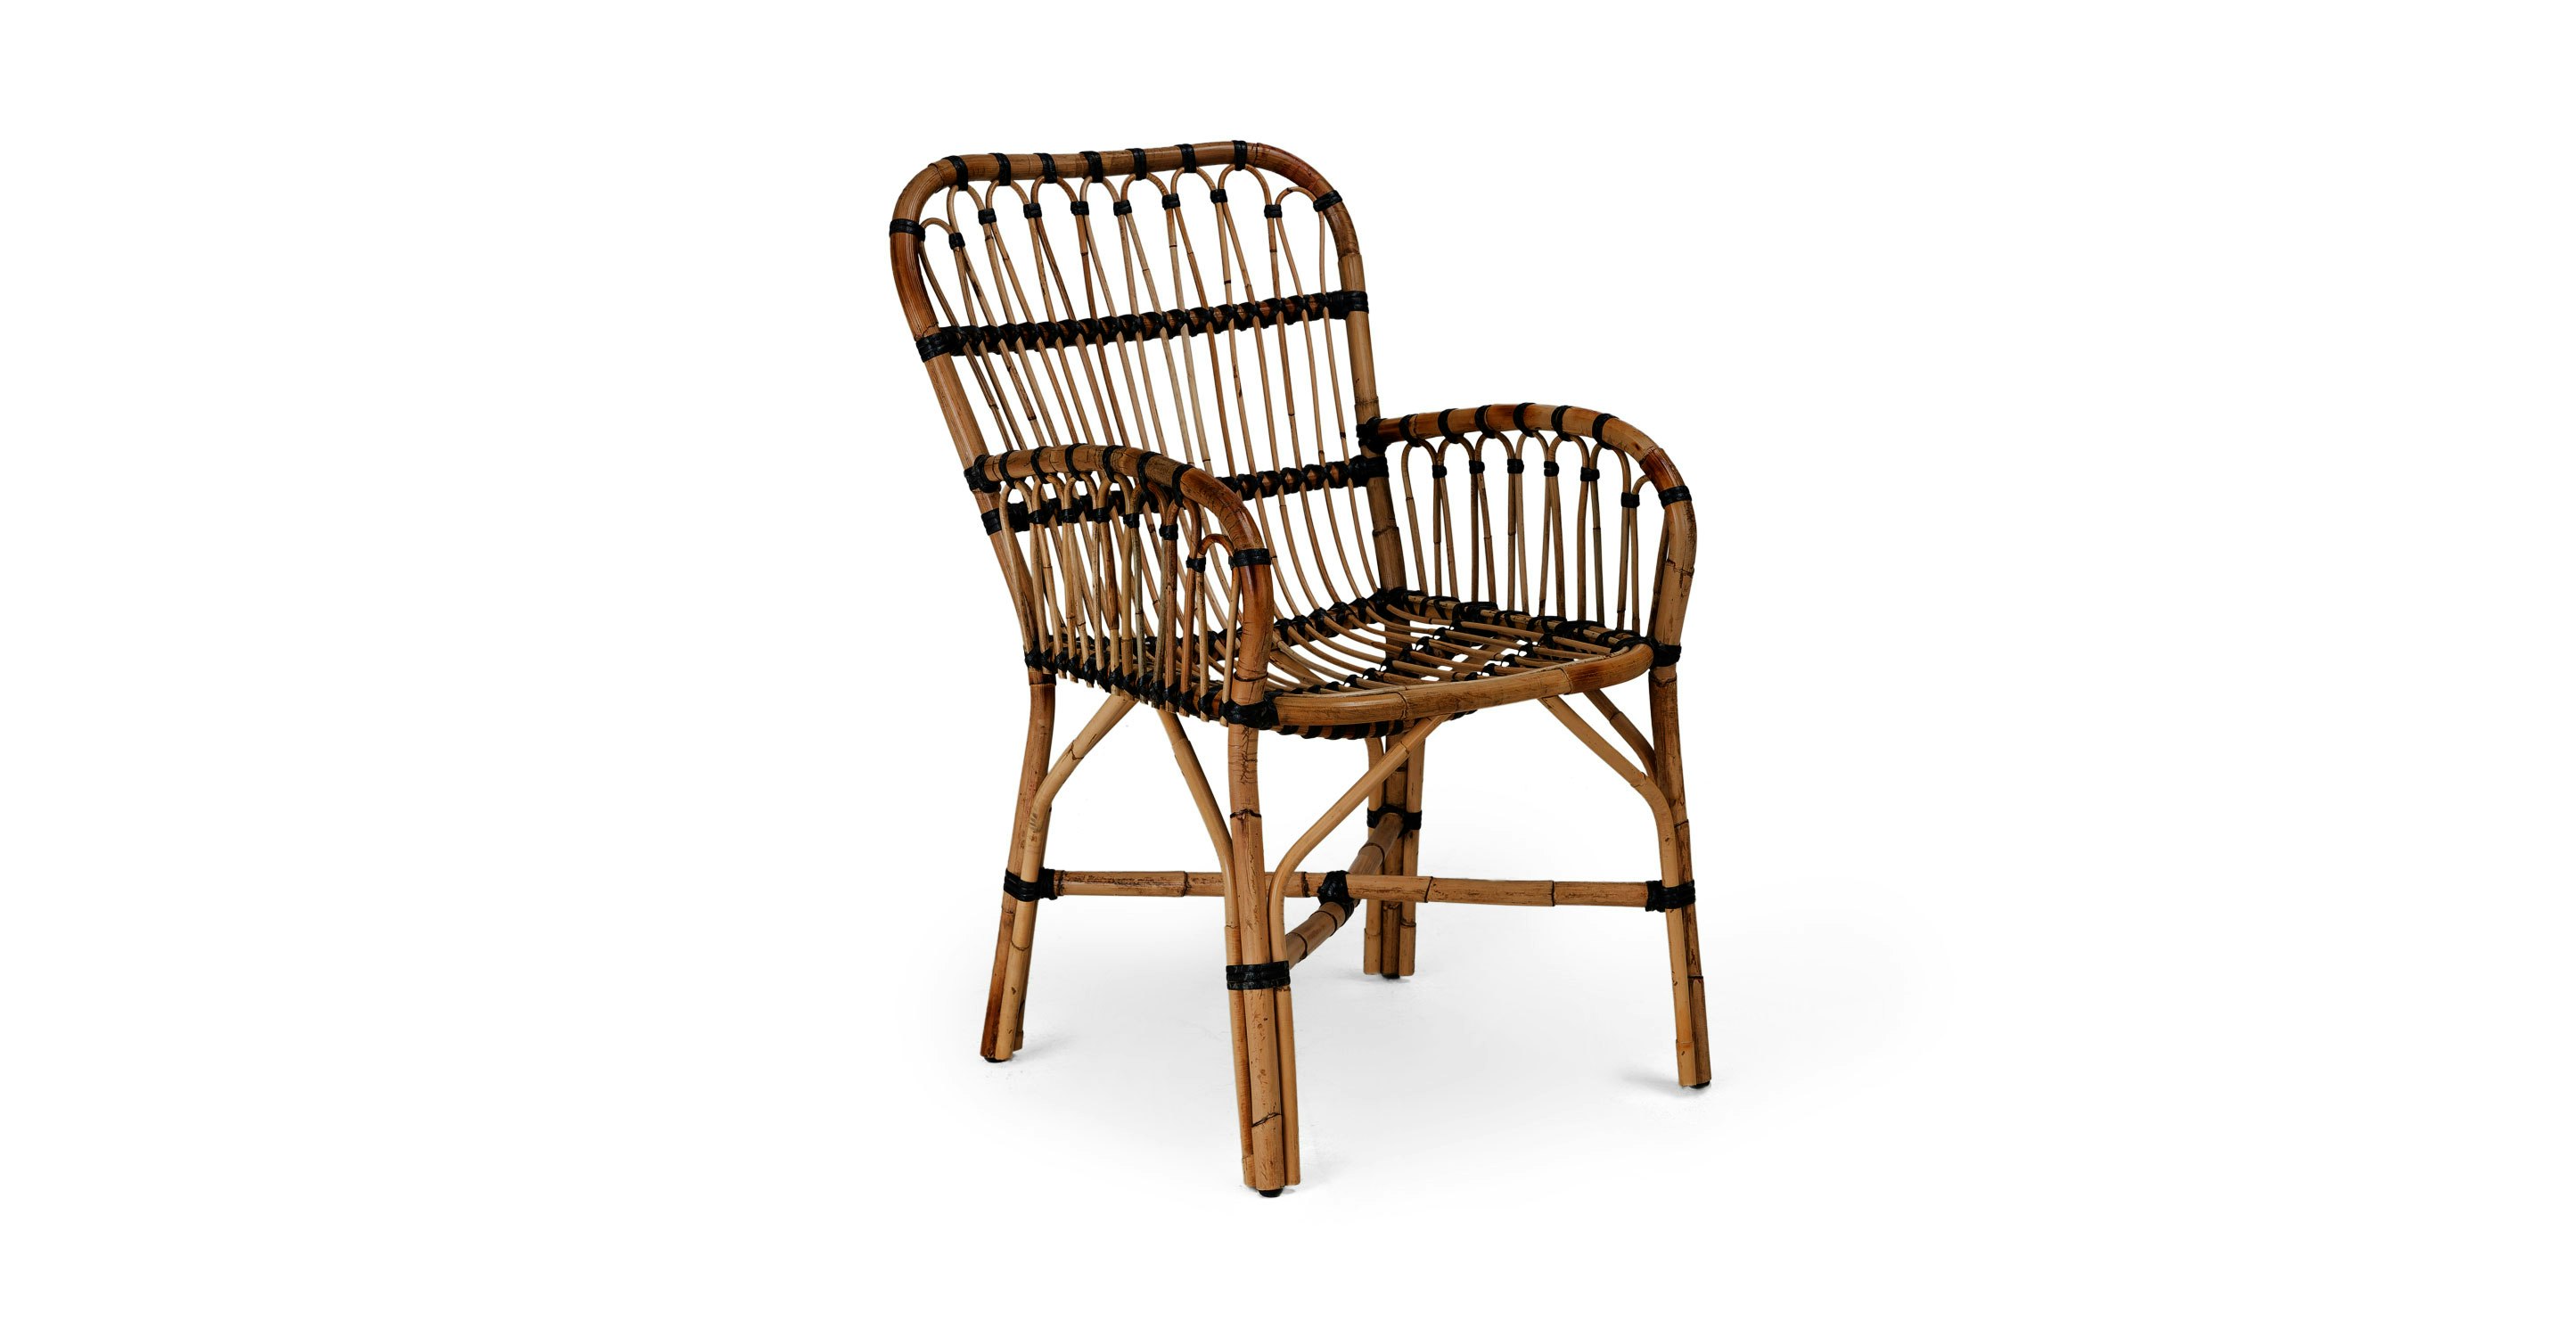 Rattan Malou Outdoor Wicker Dining Chair Article